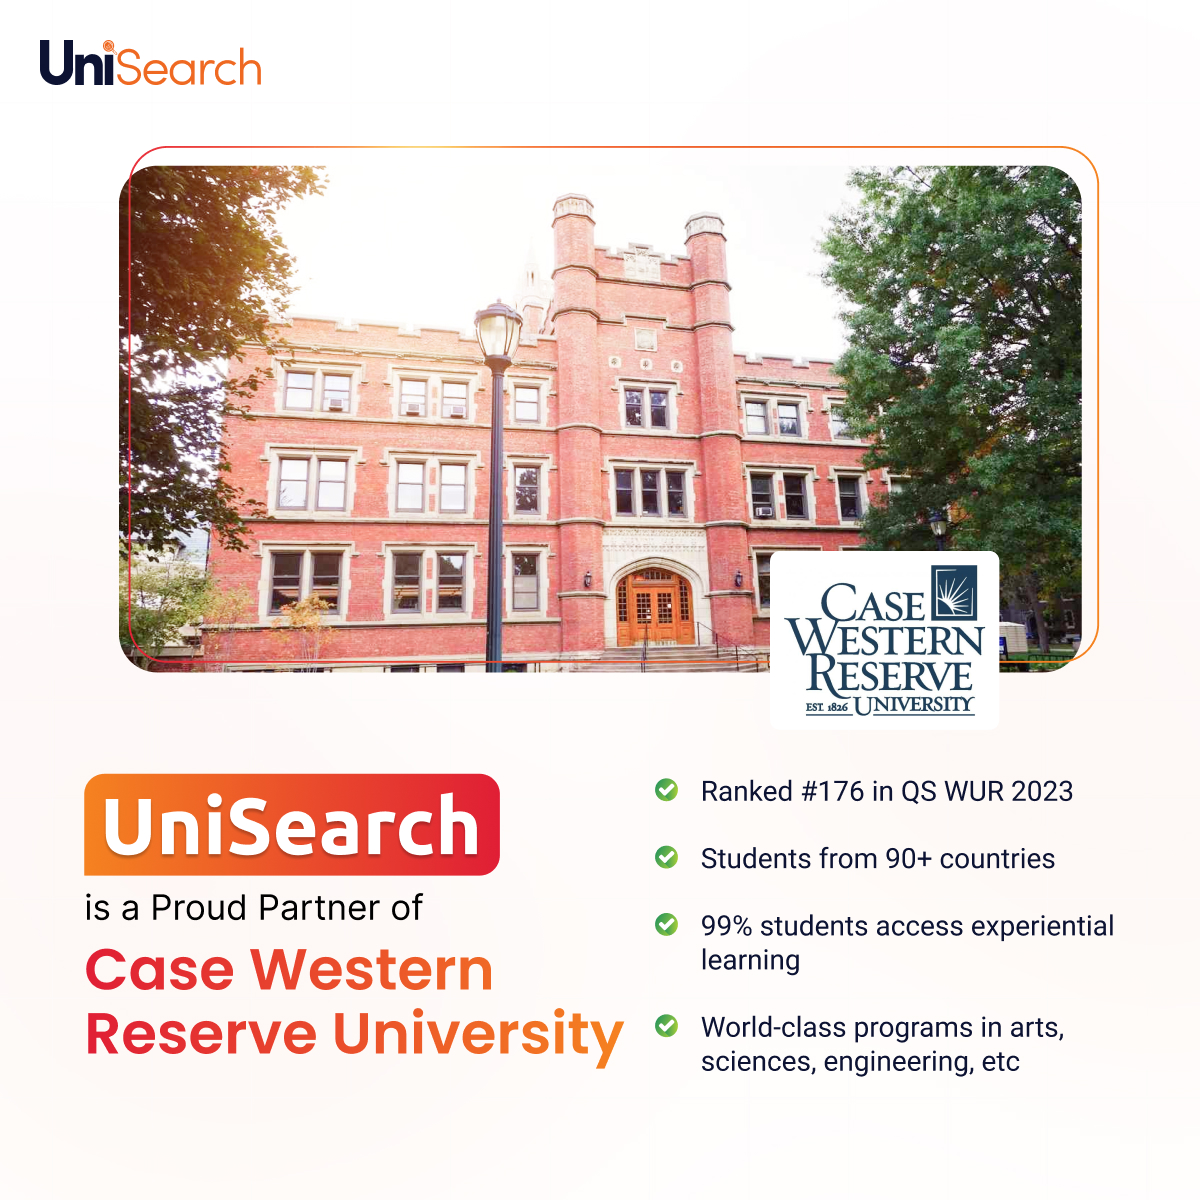 UniSearch is delighted to partner with @cwru, a global top 200 institution and one of the leading universities in the USA.

#CaseWesternReserveUniversity #StudyintheUSA #UniversityPartner #studyabroad #unisearch #myunisearch #edtech